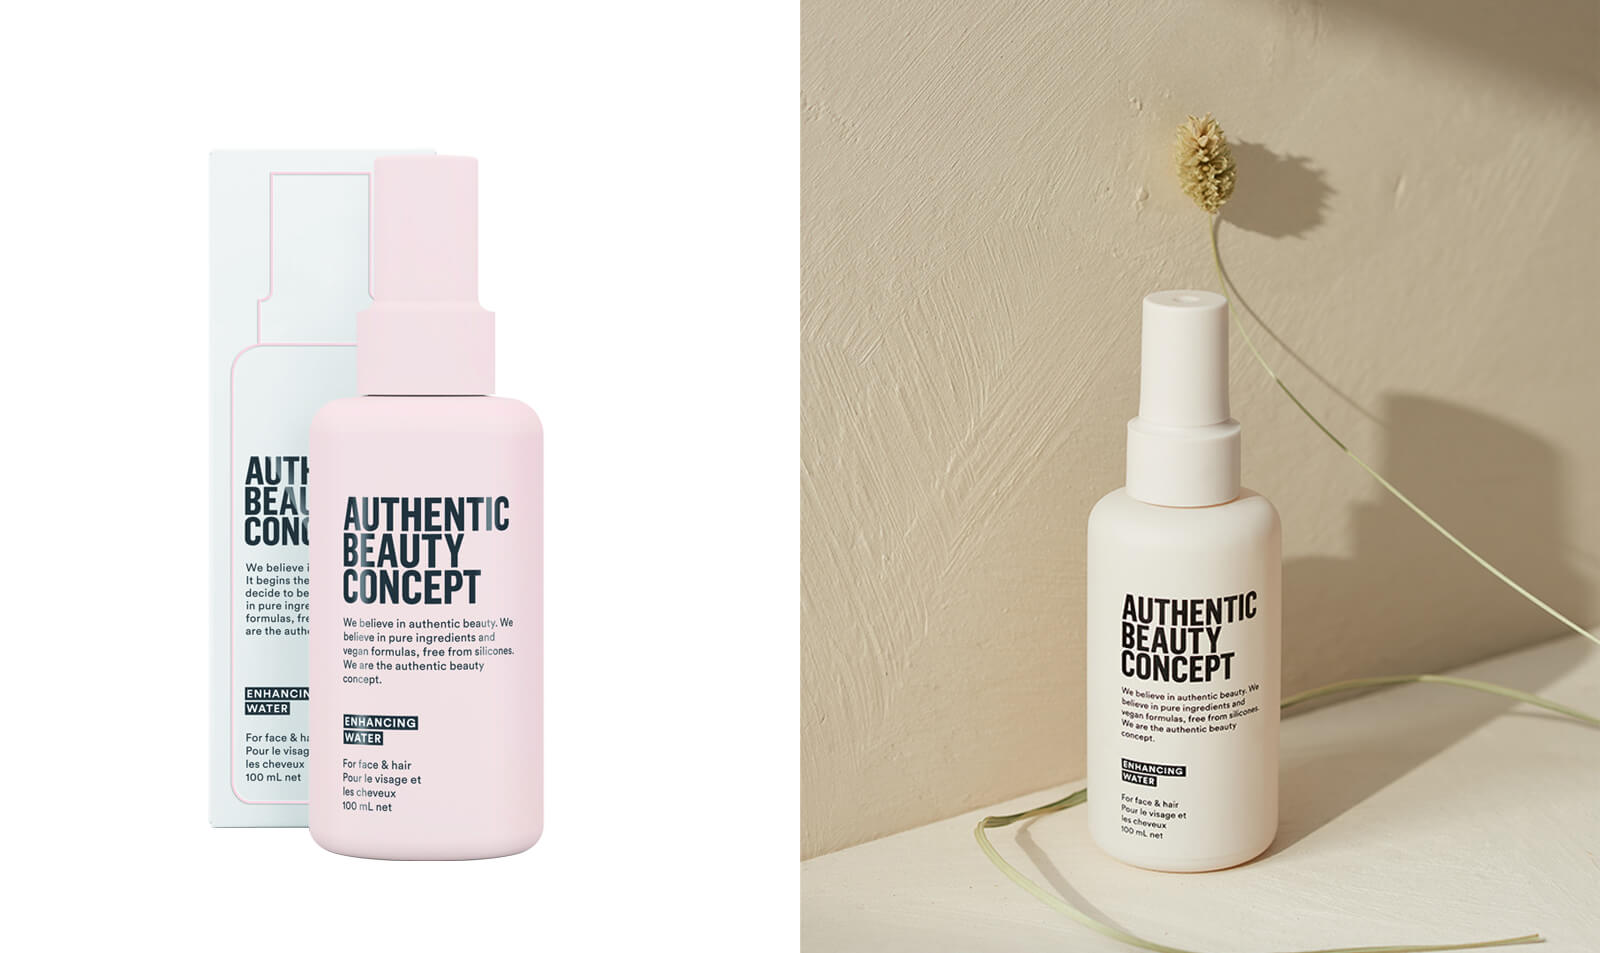 AUTHENTIC BEAUTY CONCEPT “CONDITIONING WATER”